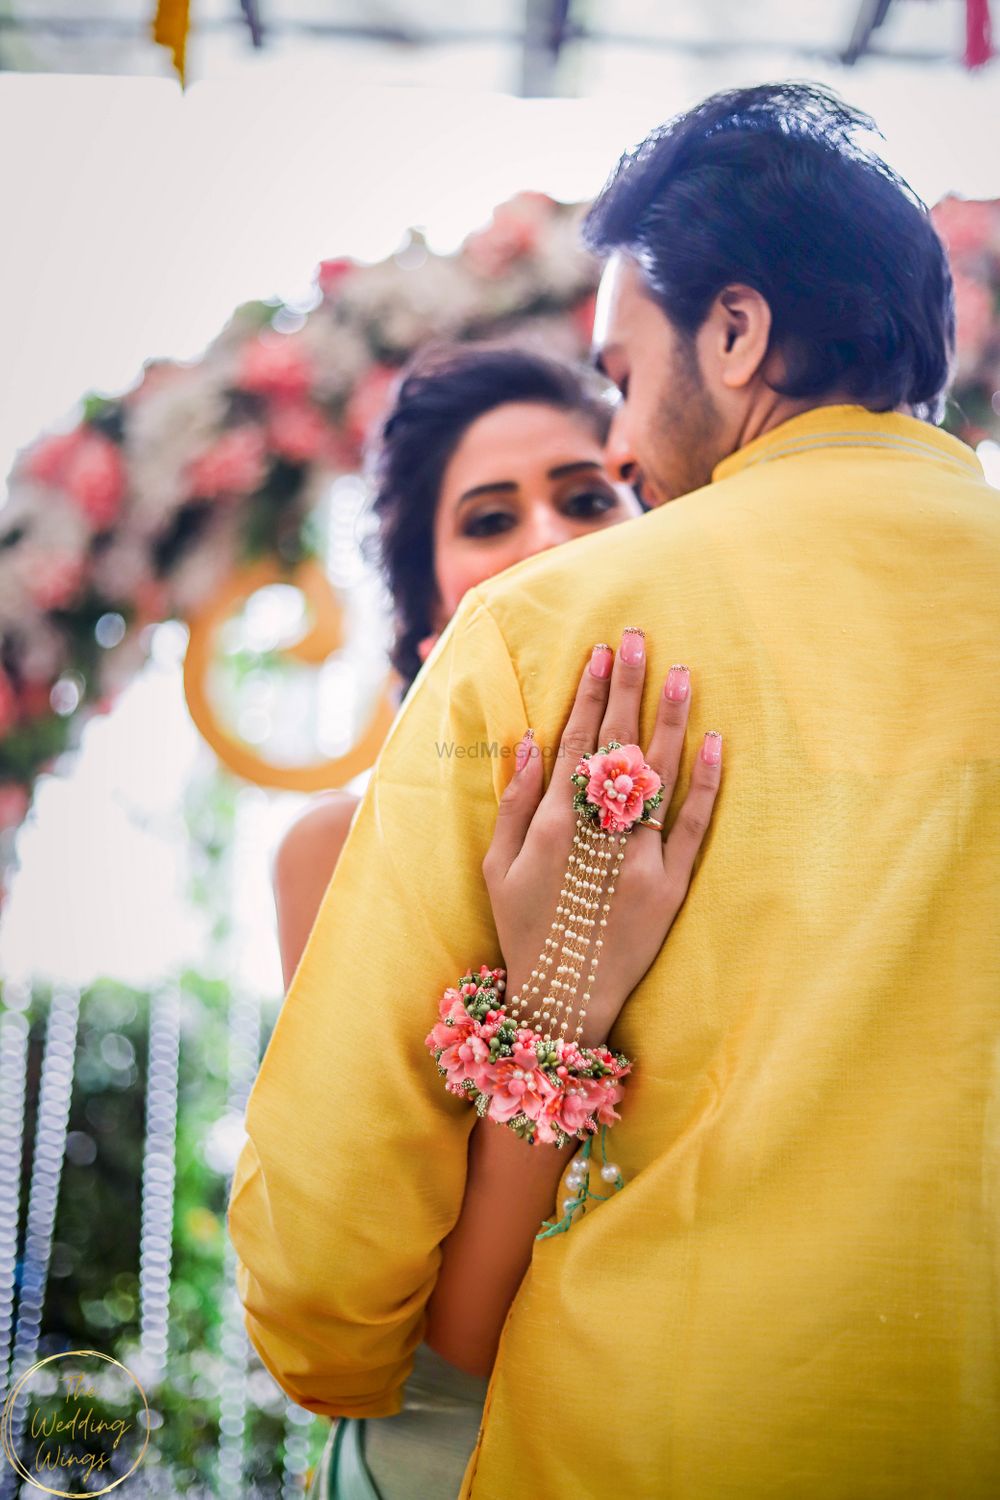 Photo From Anmol Chandni - By The Wedding Wings